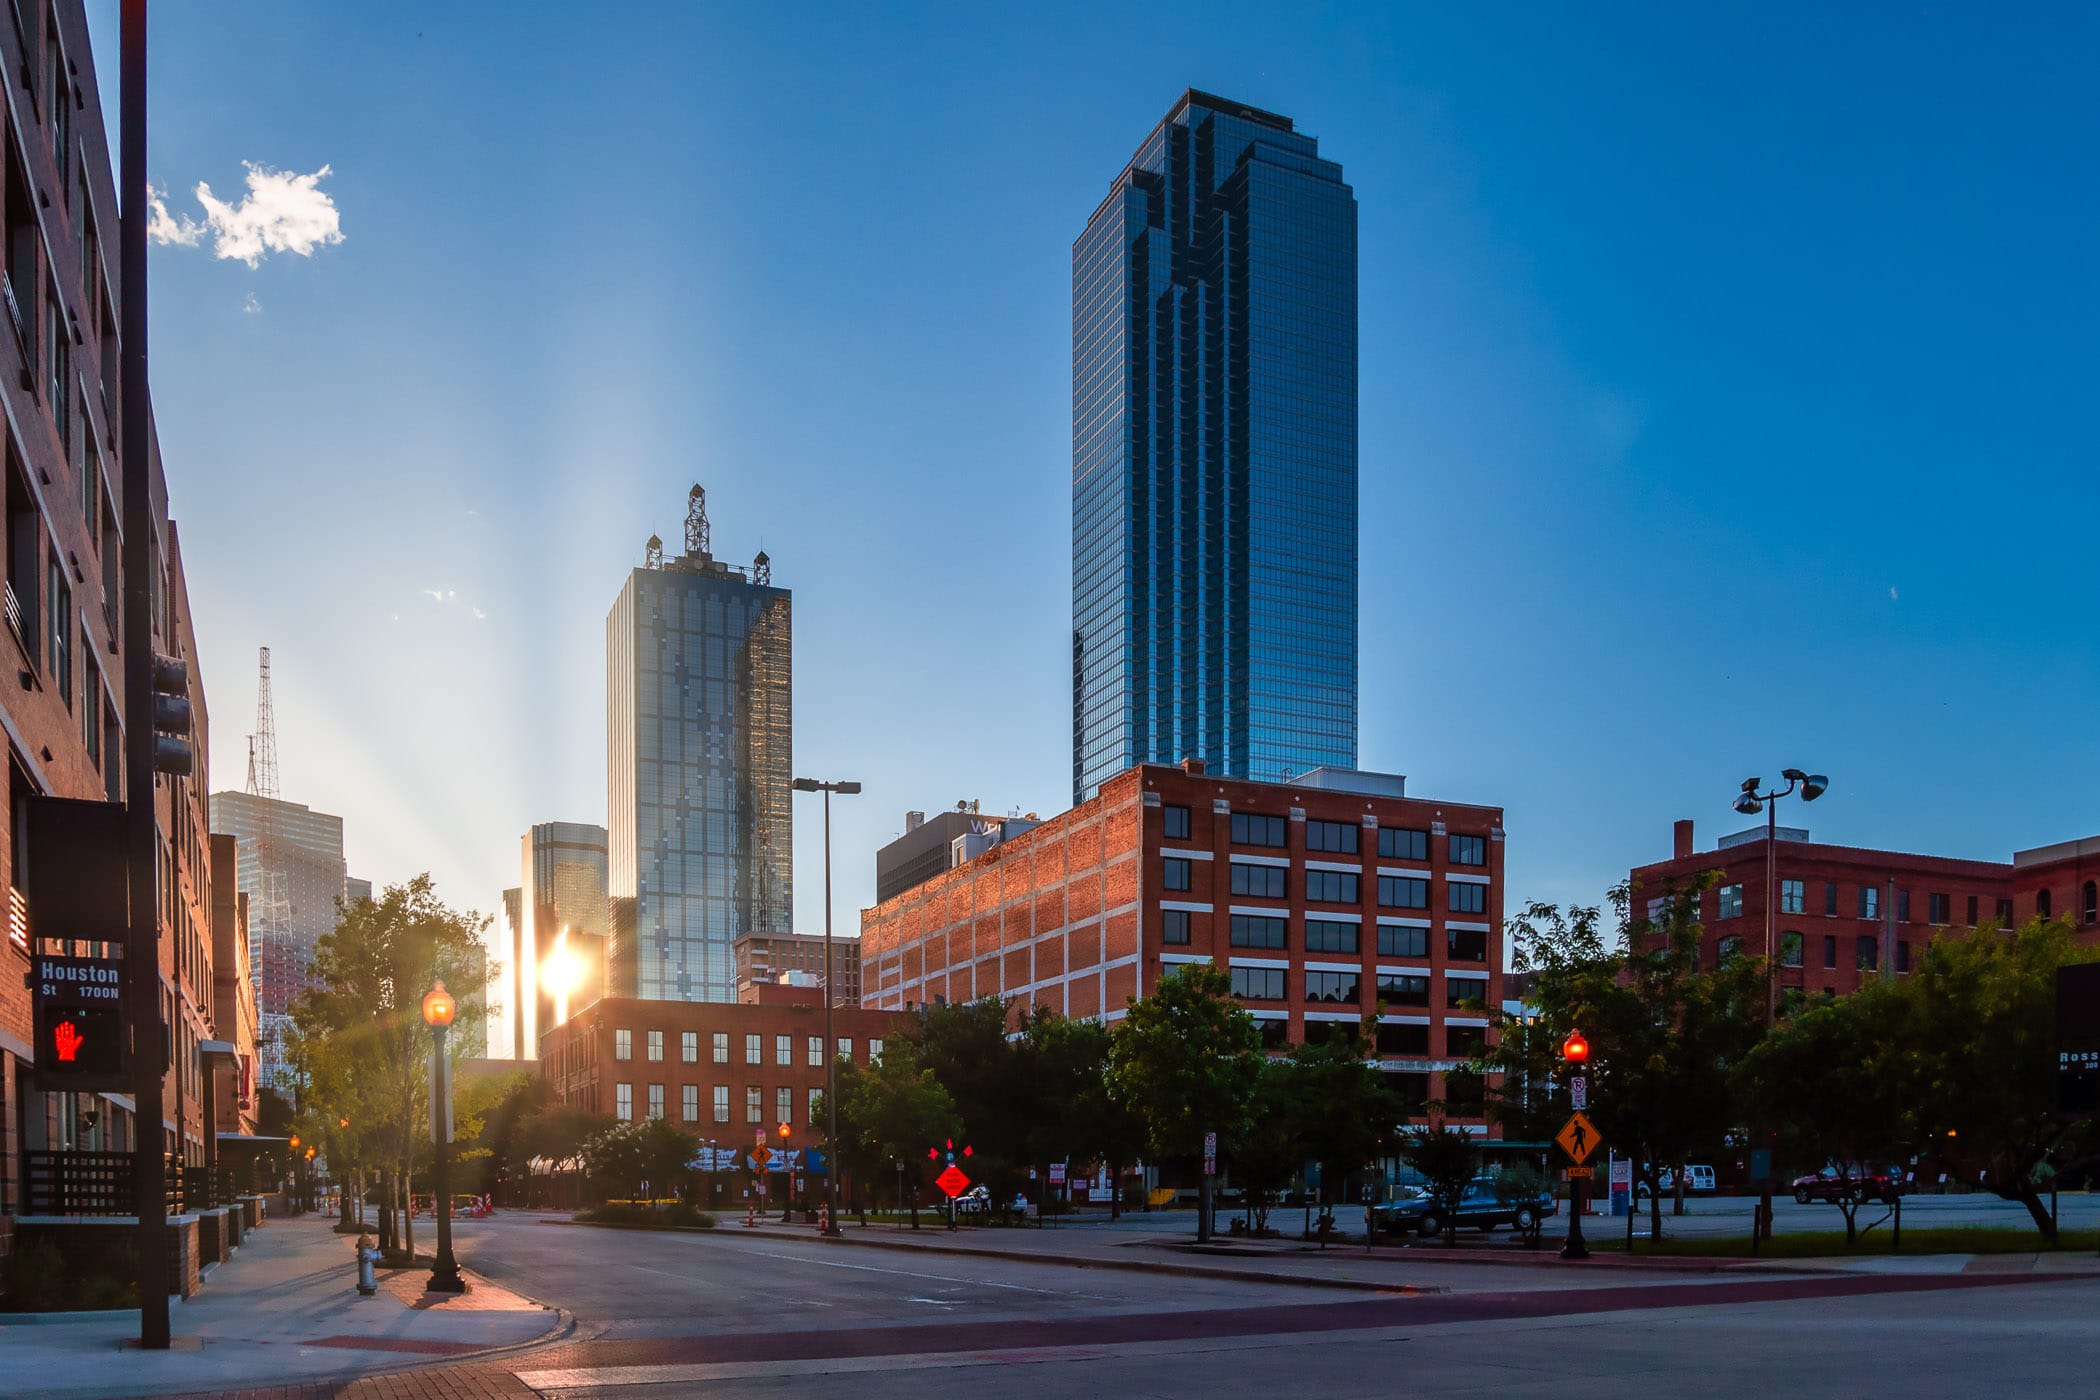 The morning sun glints off Downtown Dallas' LTV Tower as its first light illuminates the city.